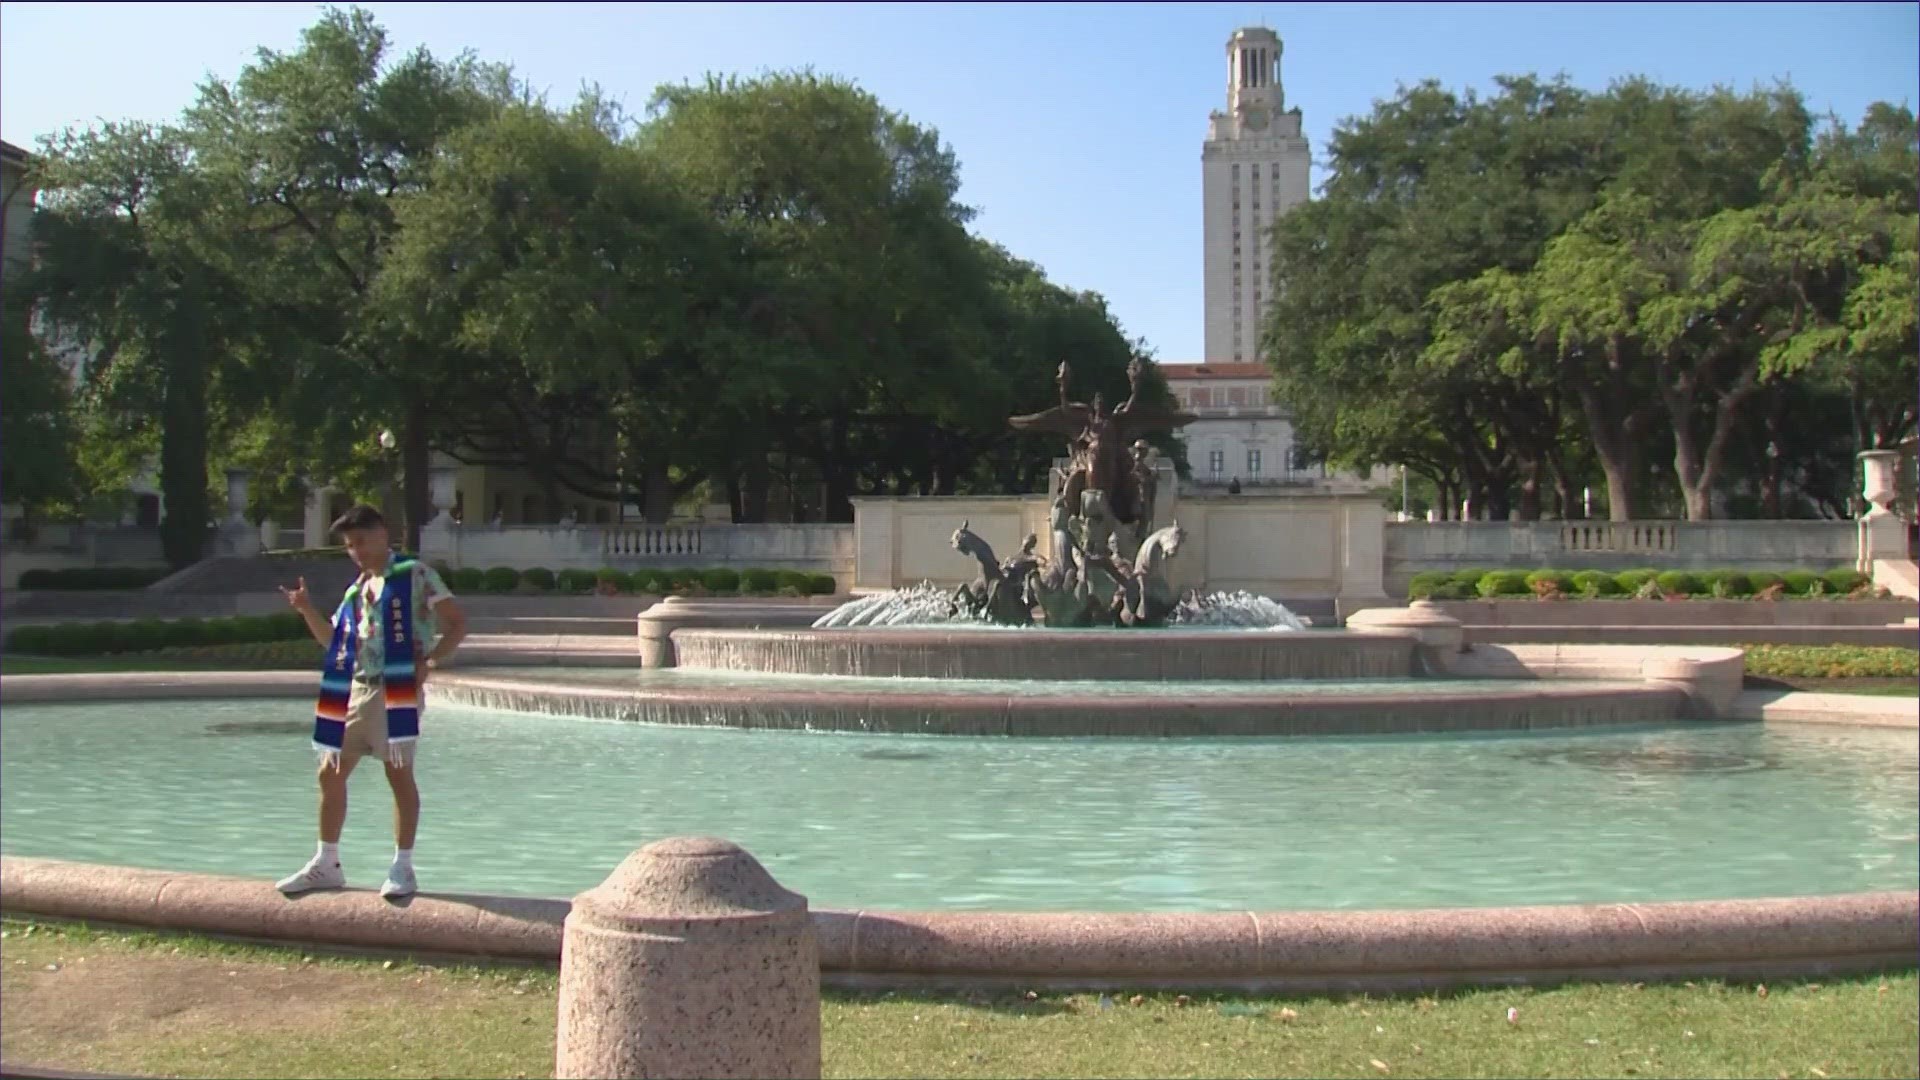 UT now ranks No. 9 in the nation and remains the top public university in Texas.